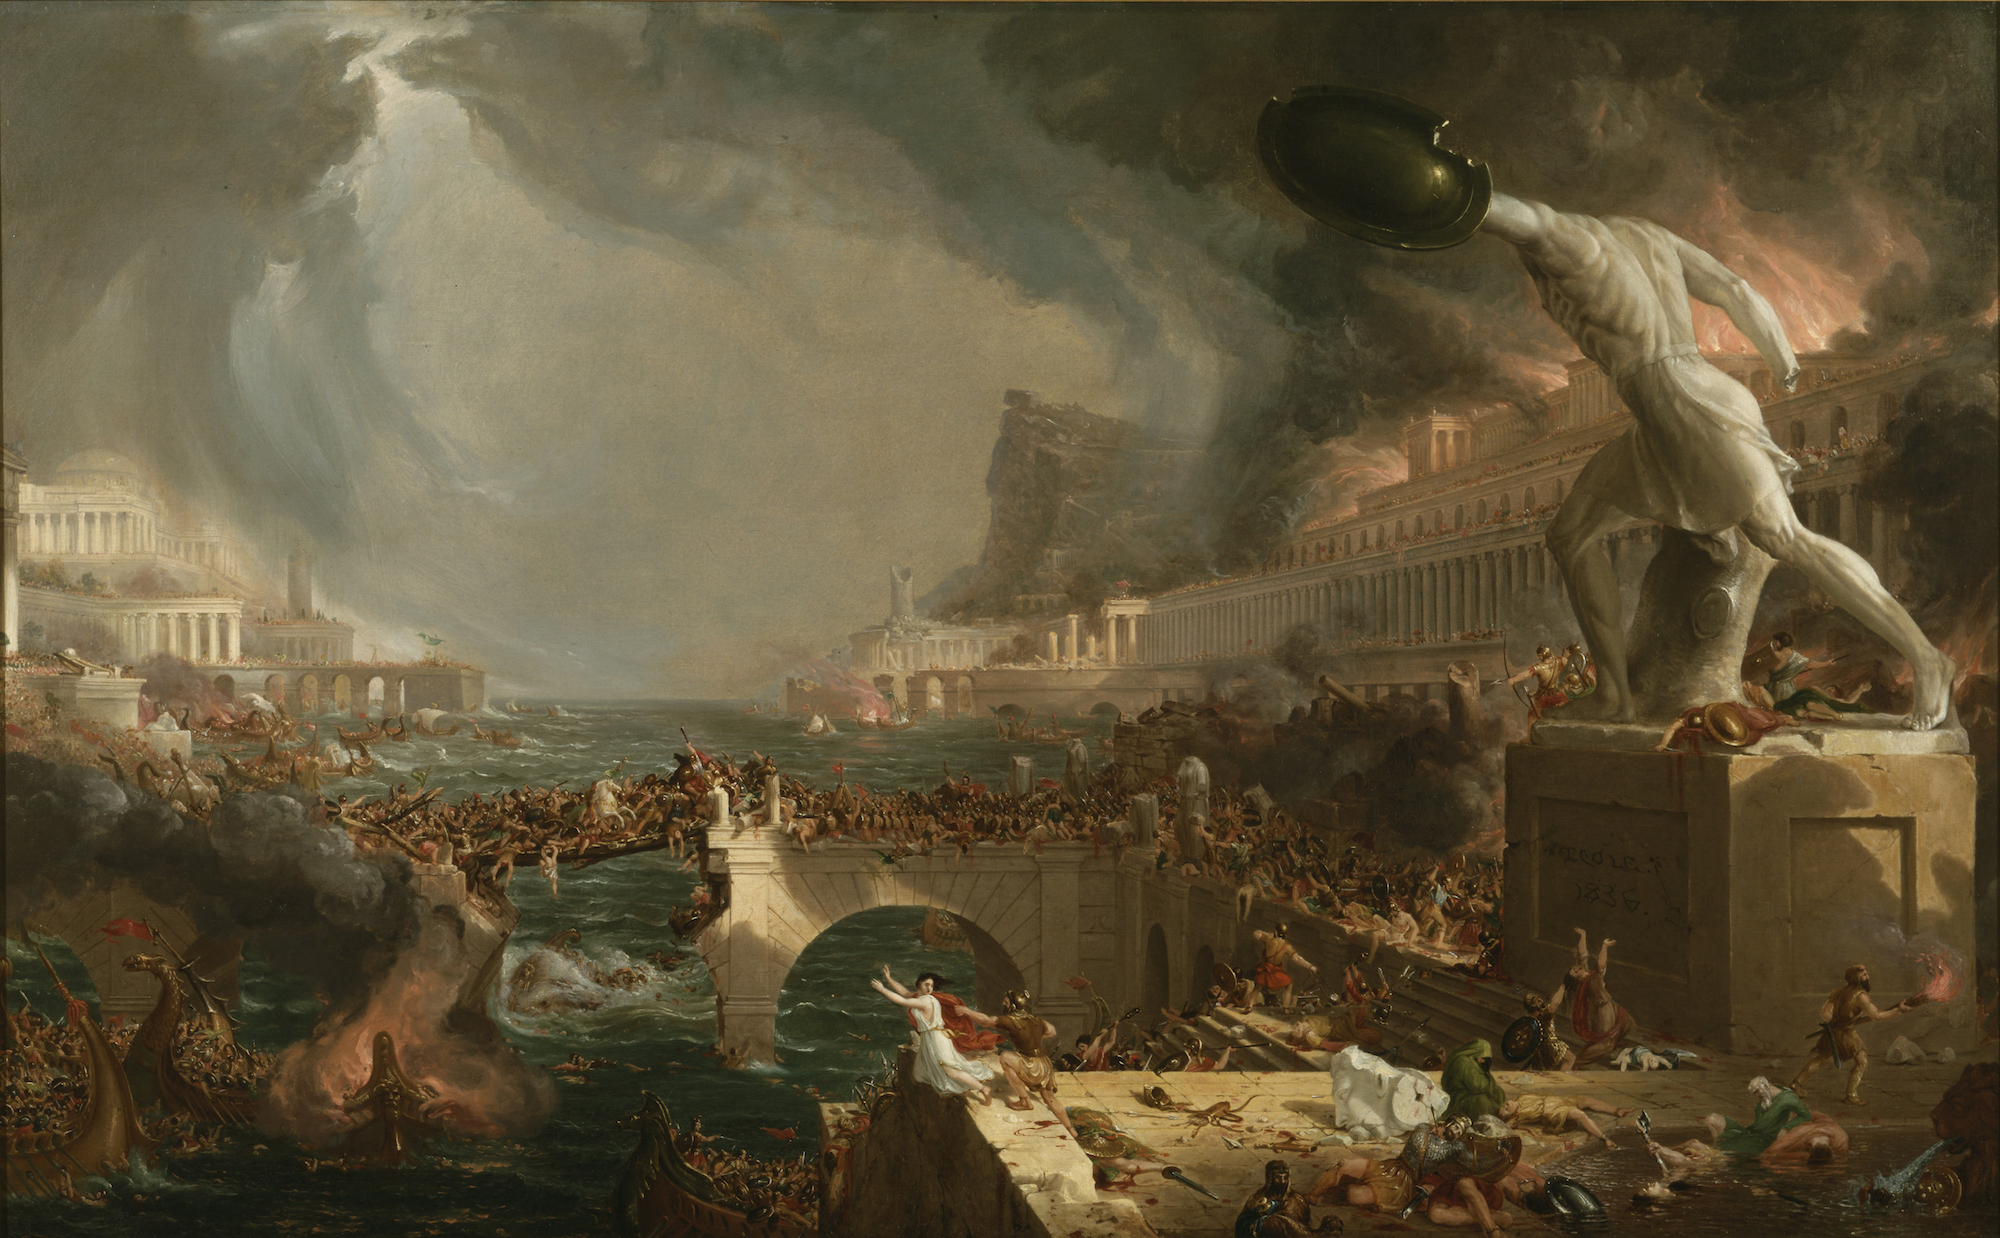 Thomas Cole. The Course of Empire: Destruction. 1836. Oil on canvas. 39 1⁄4 × 63 1⁄2 in. New-York Historical Society. From the exhibition "A Brief History of the Future," Musée du Louvre, Paris. 2015–16.